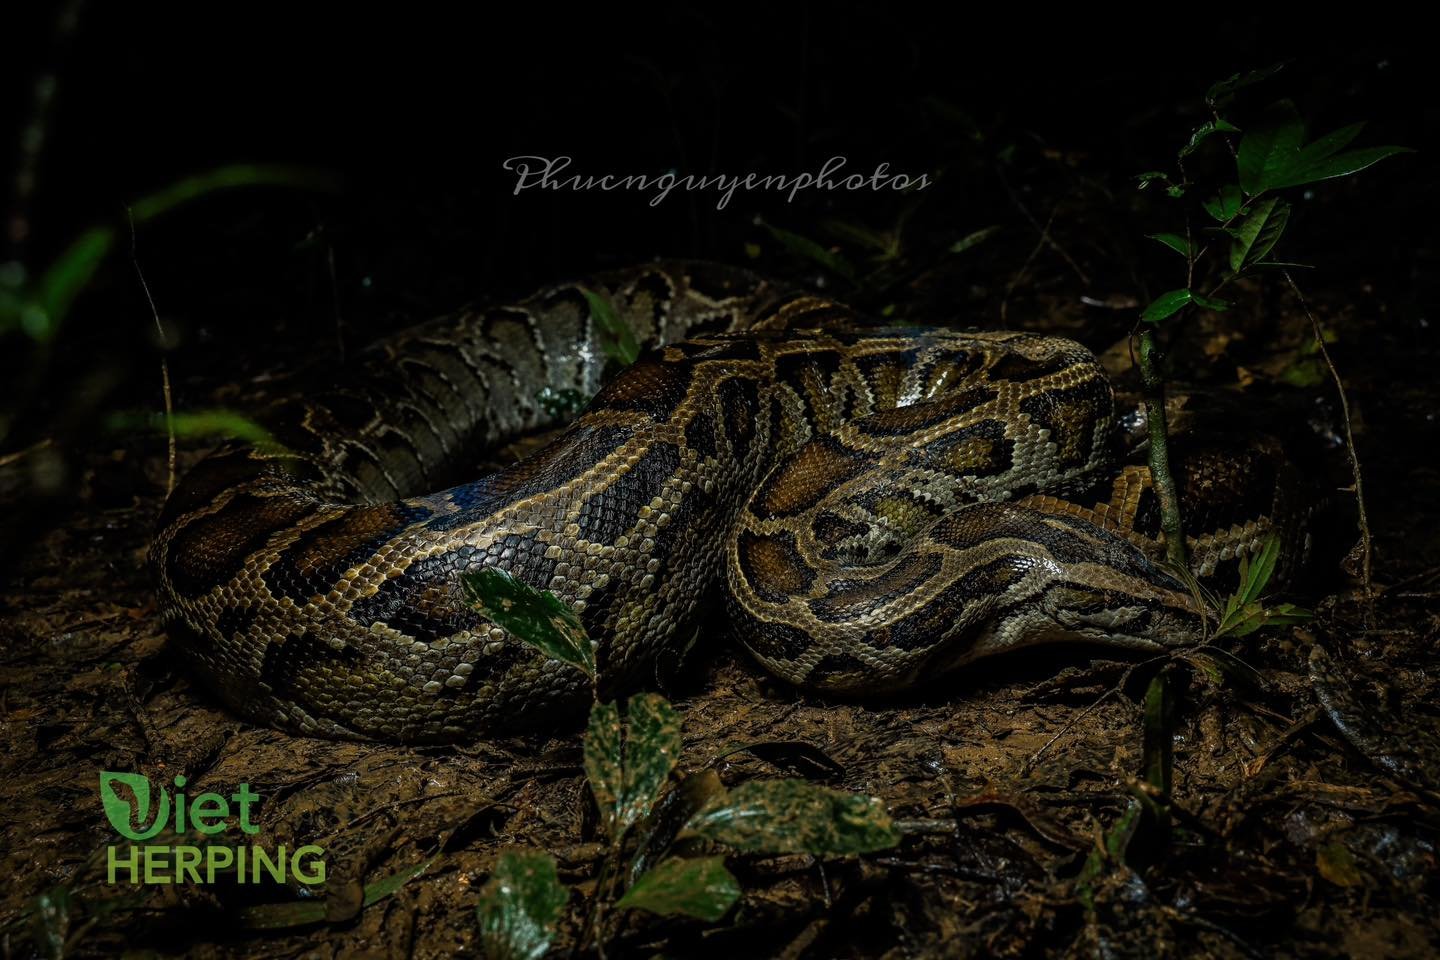 A memorable dry season Herping trip at the Dong Nai Cultural Nature Reserve with a lot of luck. We found a python lying along the stream waiting for the prey

#instagood #photooftheday #beautiful #nature #tour #venomous #tropicalherping #mantisofinst